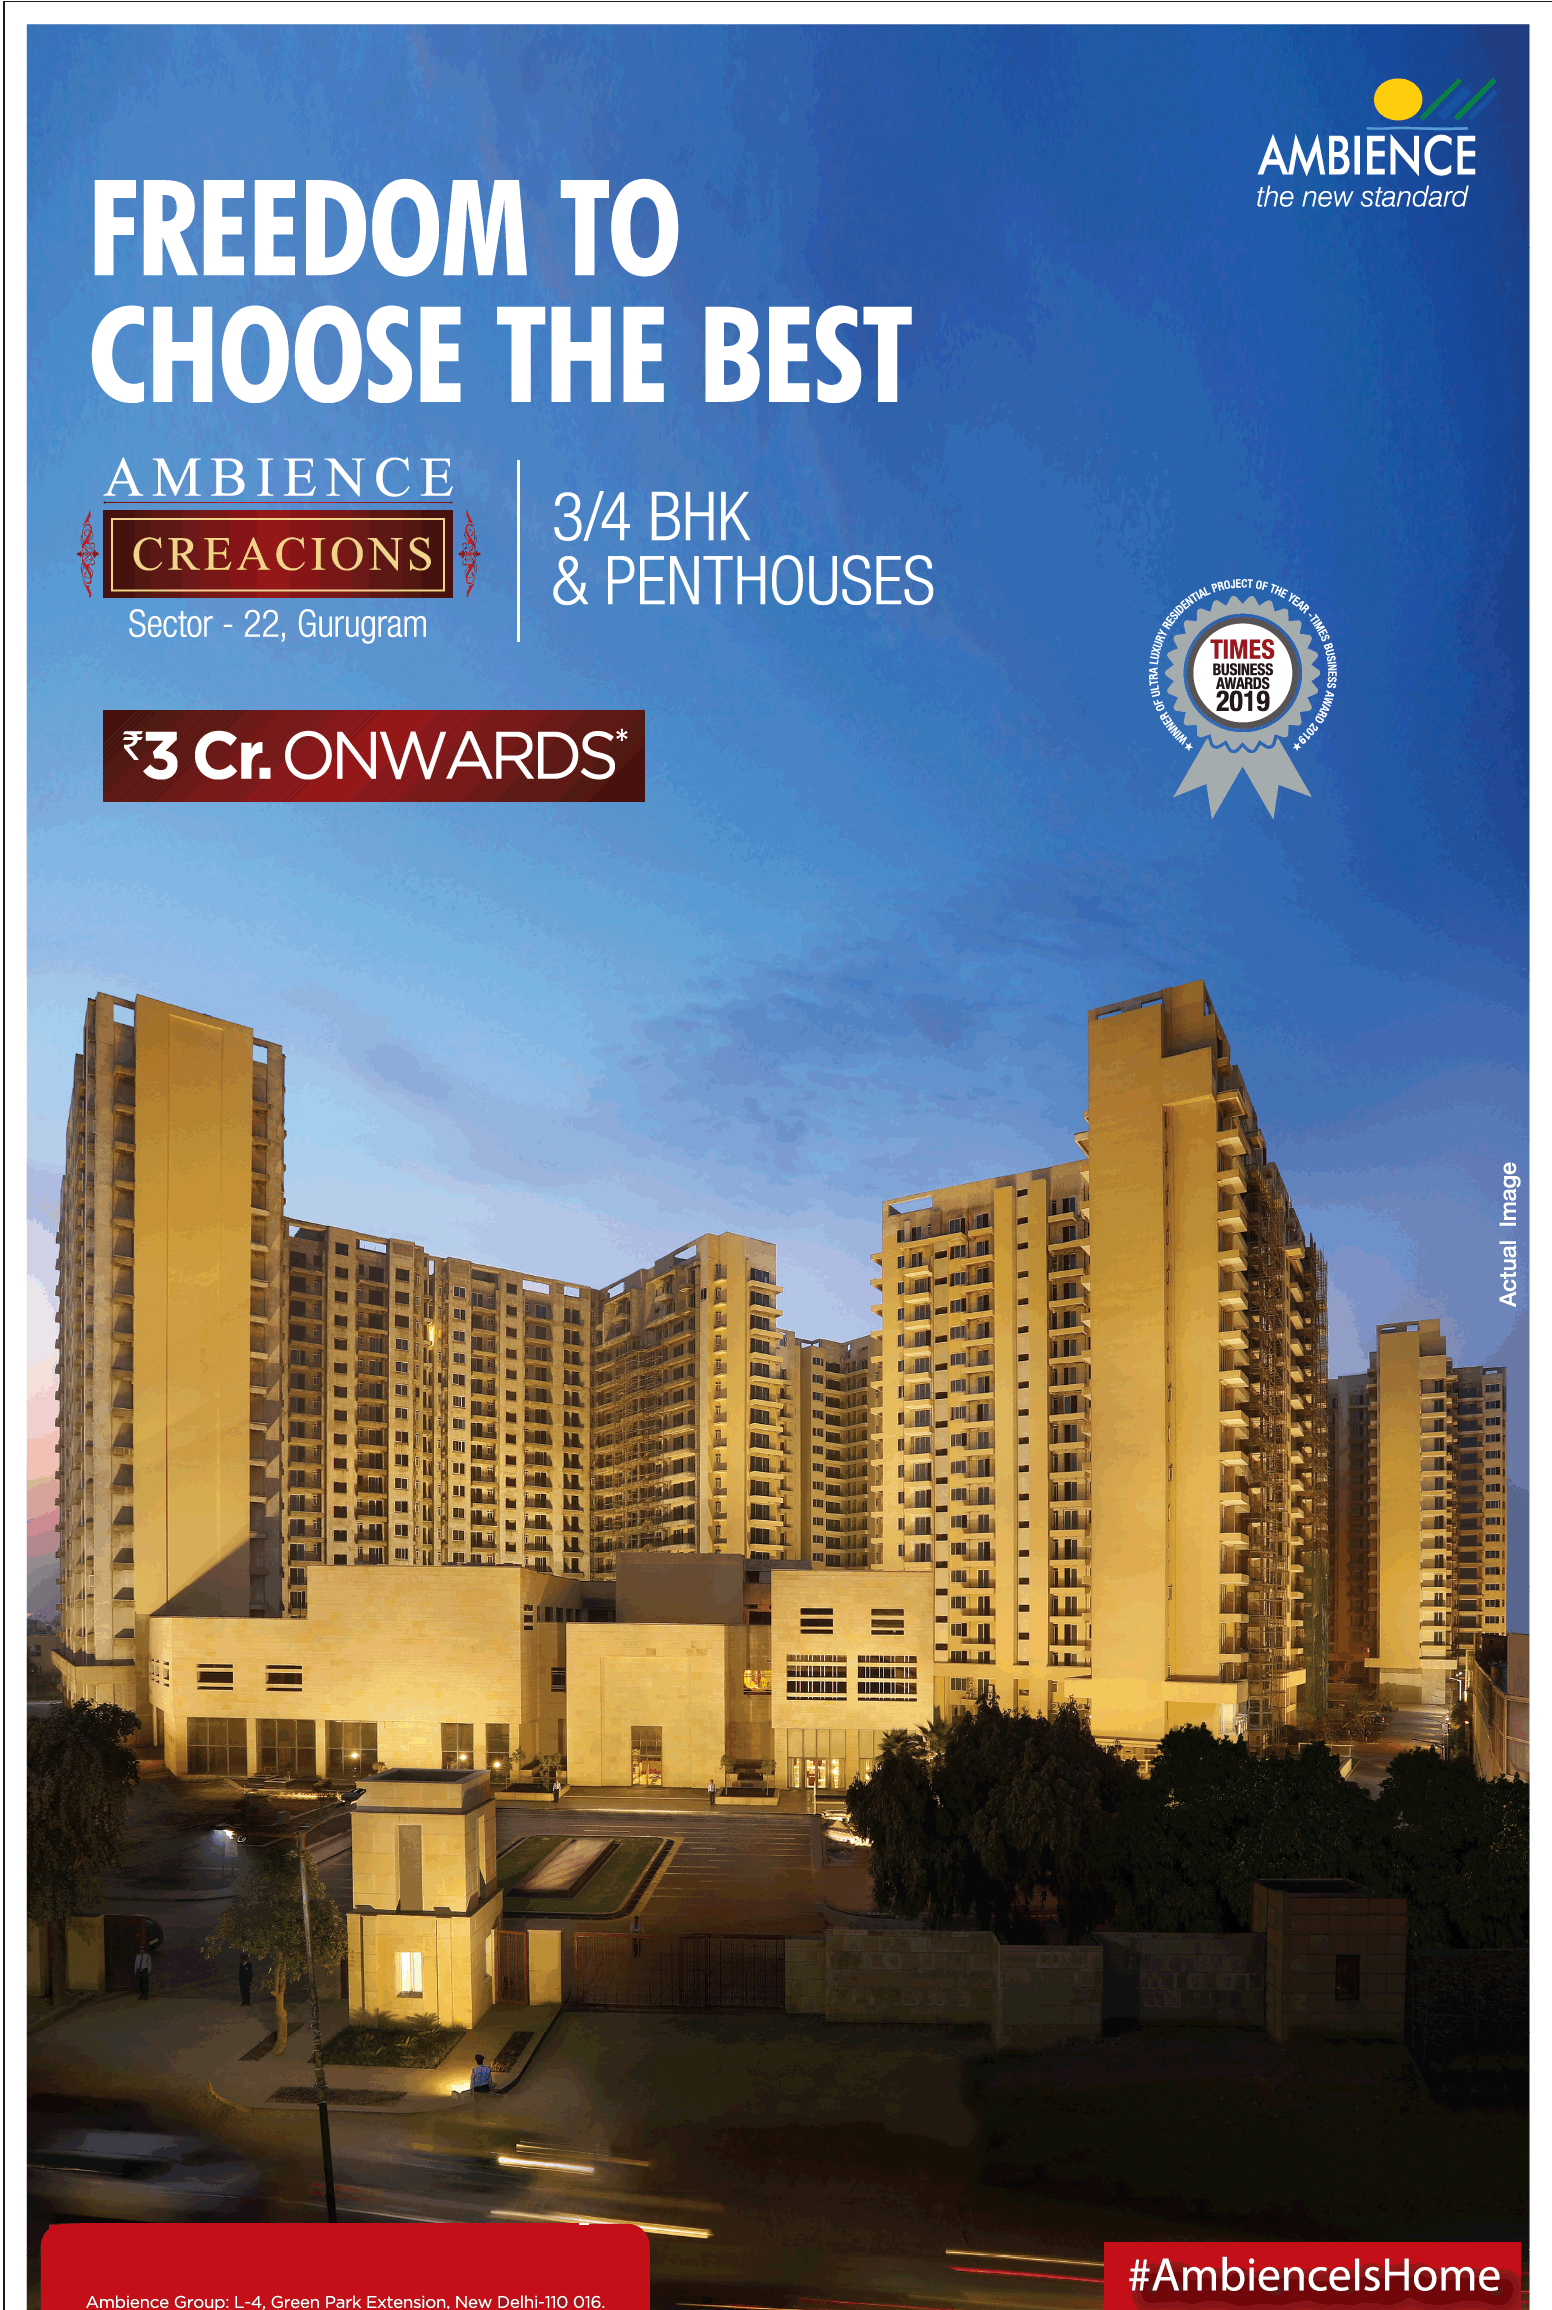 3, 4 BHK and penthouses Rs 3 Cr onwards at Ambience Creacions, Sector 22 in Gurgaon Update